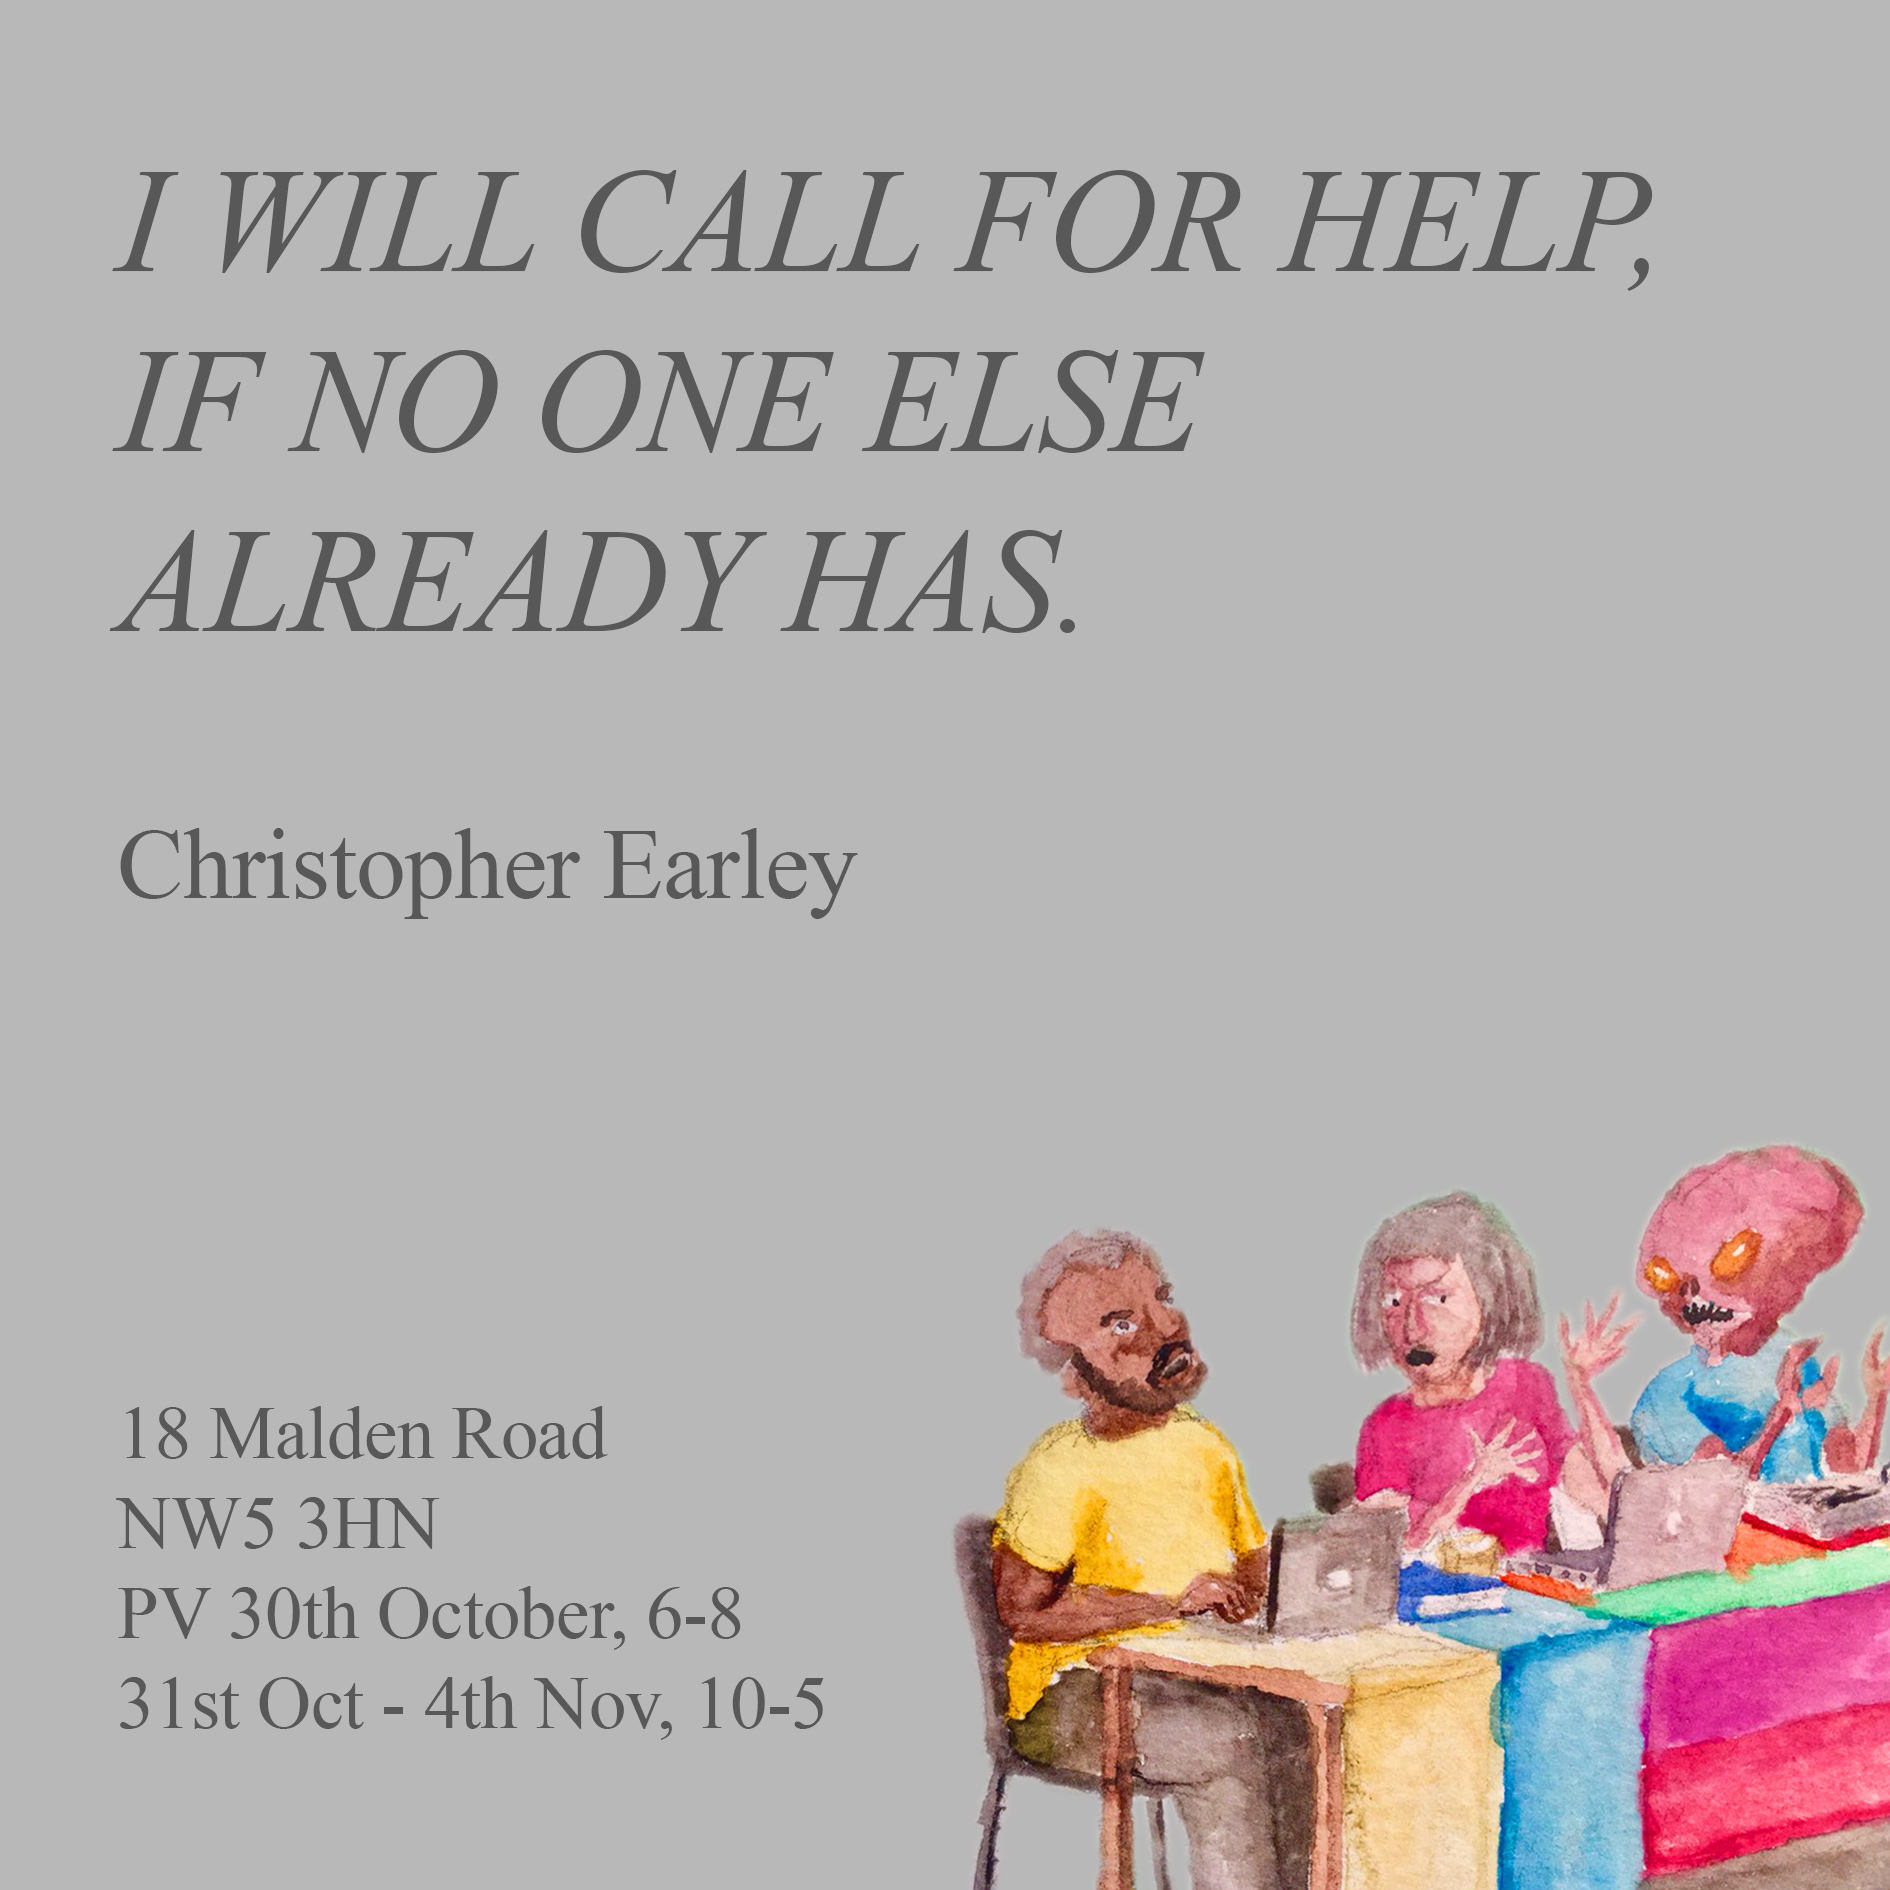 I Will Call For Help, If No One Else Already Has - Poster